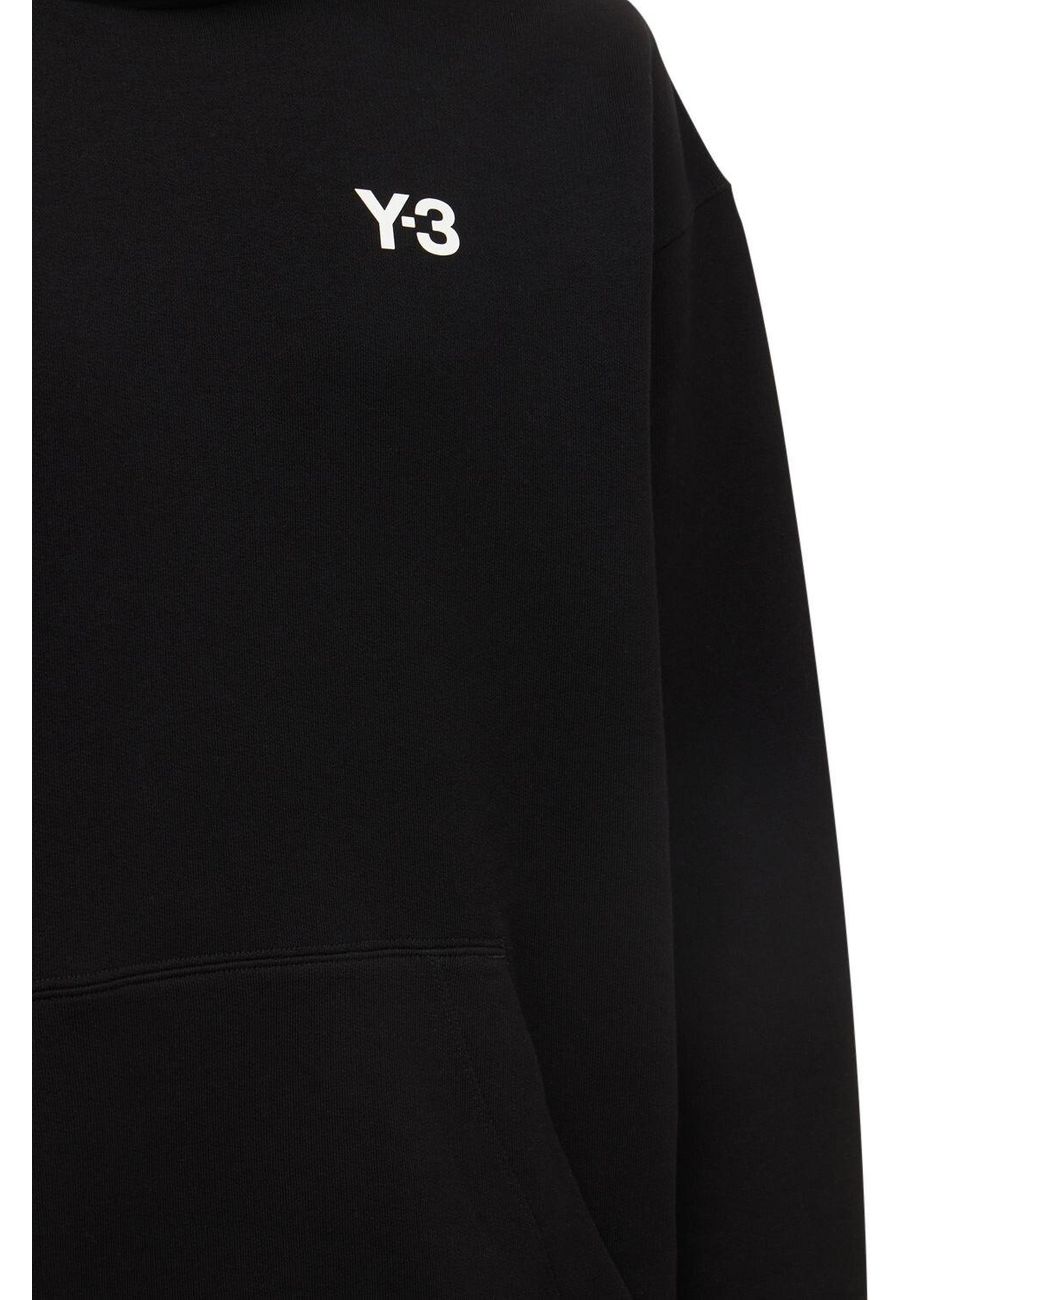 gym and workout clothes Sweatshirts Mens Clothing Activewear Y-3 Cotton 20th Anniversary Graphic Crew Sweat in White for Men 